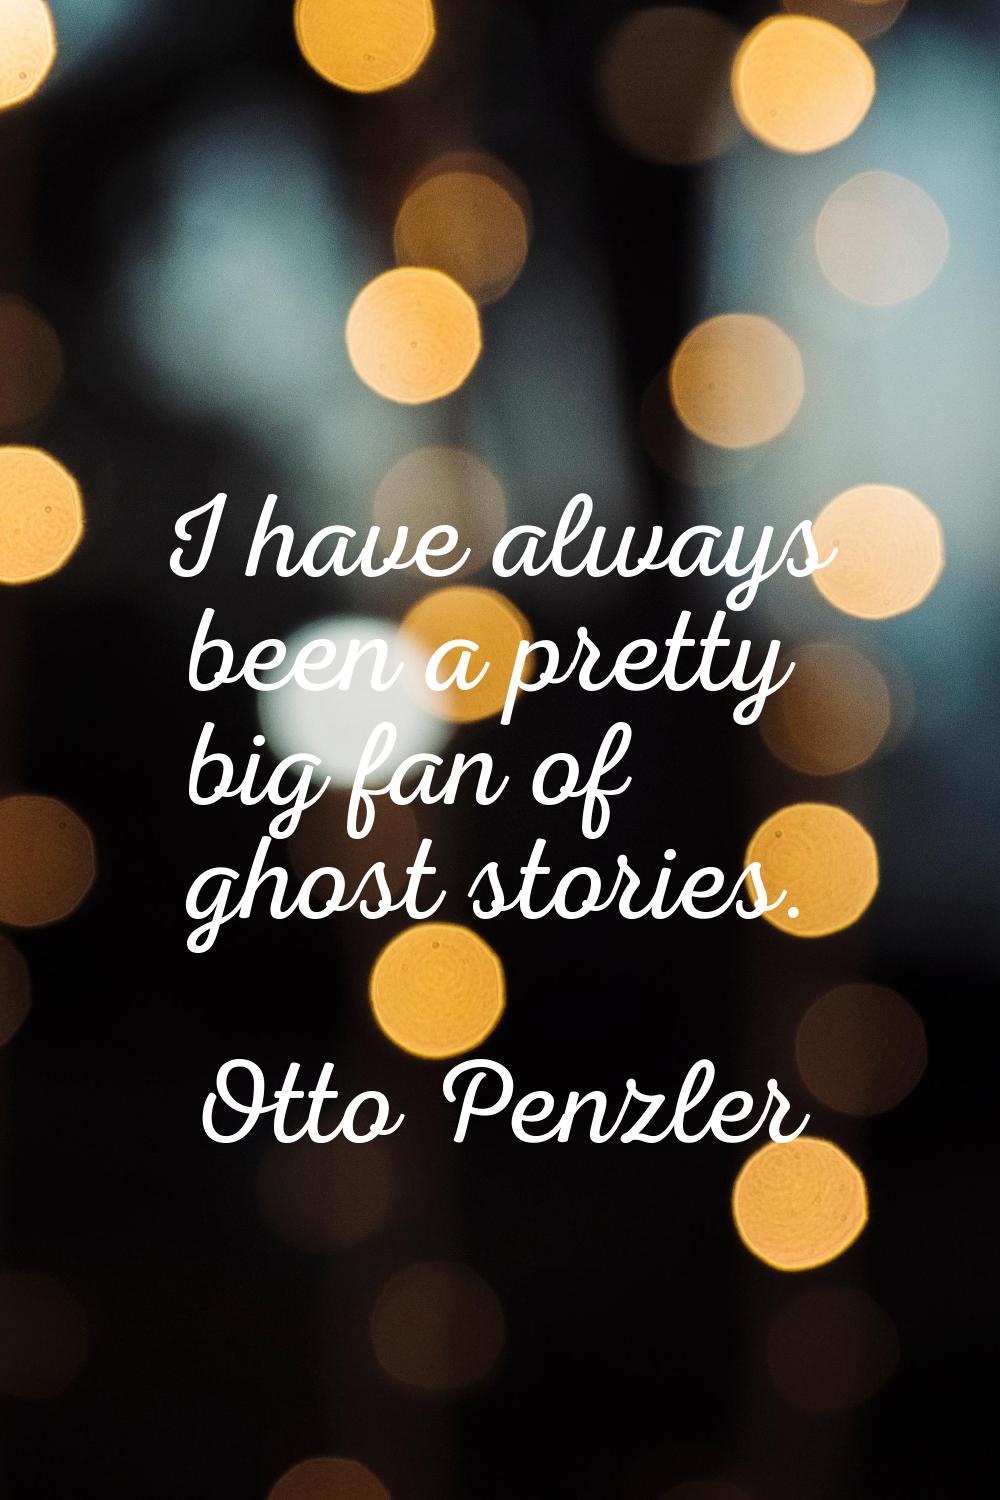 I have always been a pretty big fan of ghost stories.